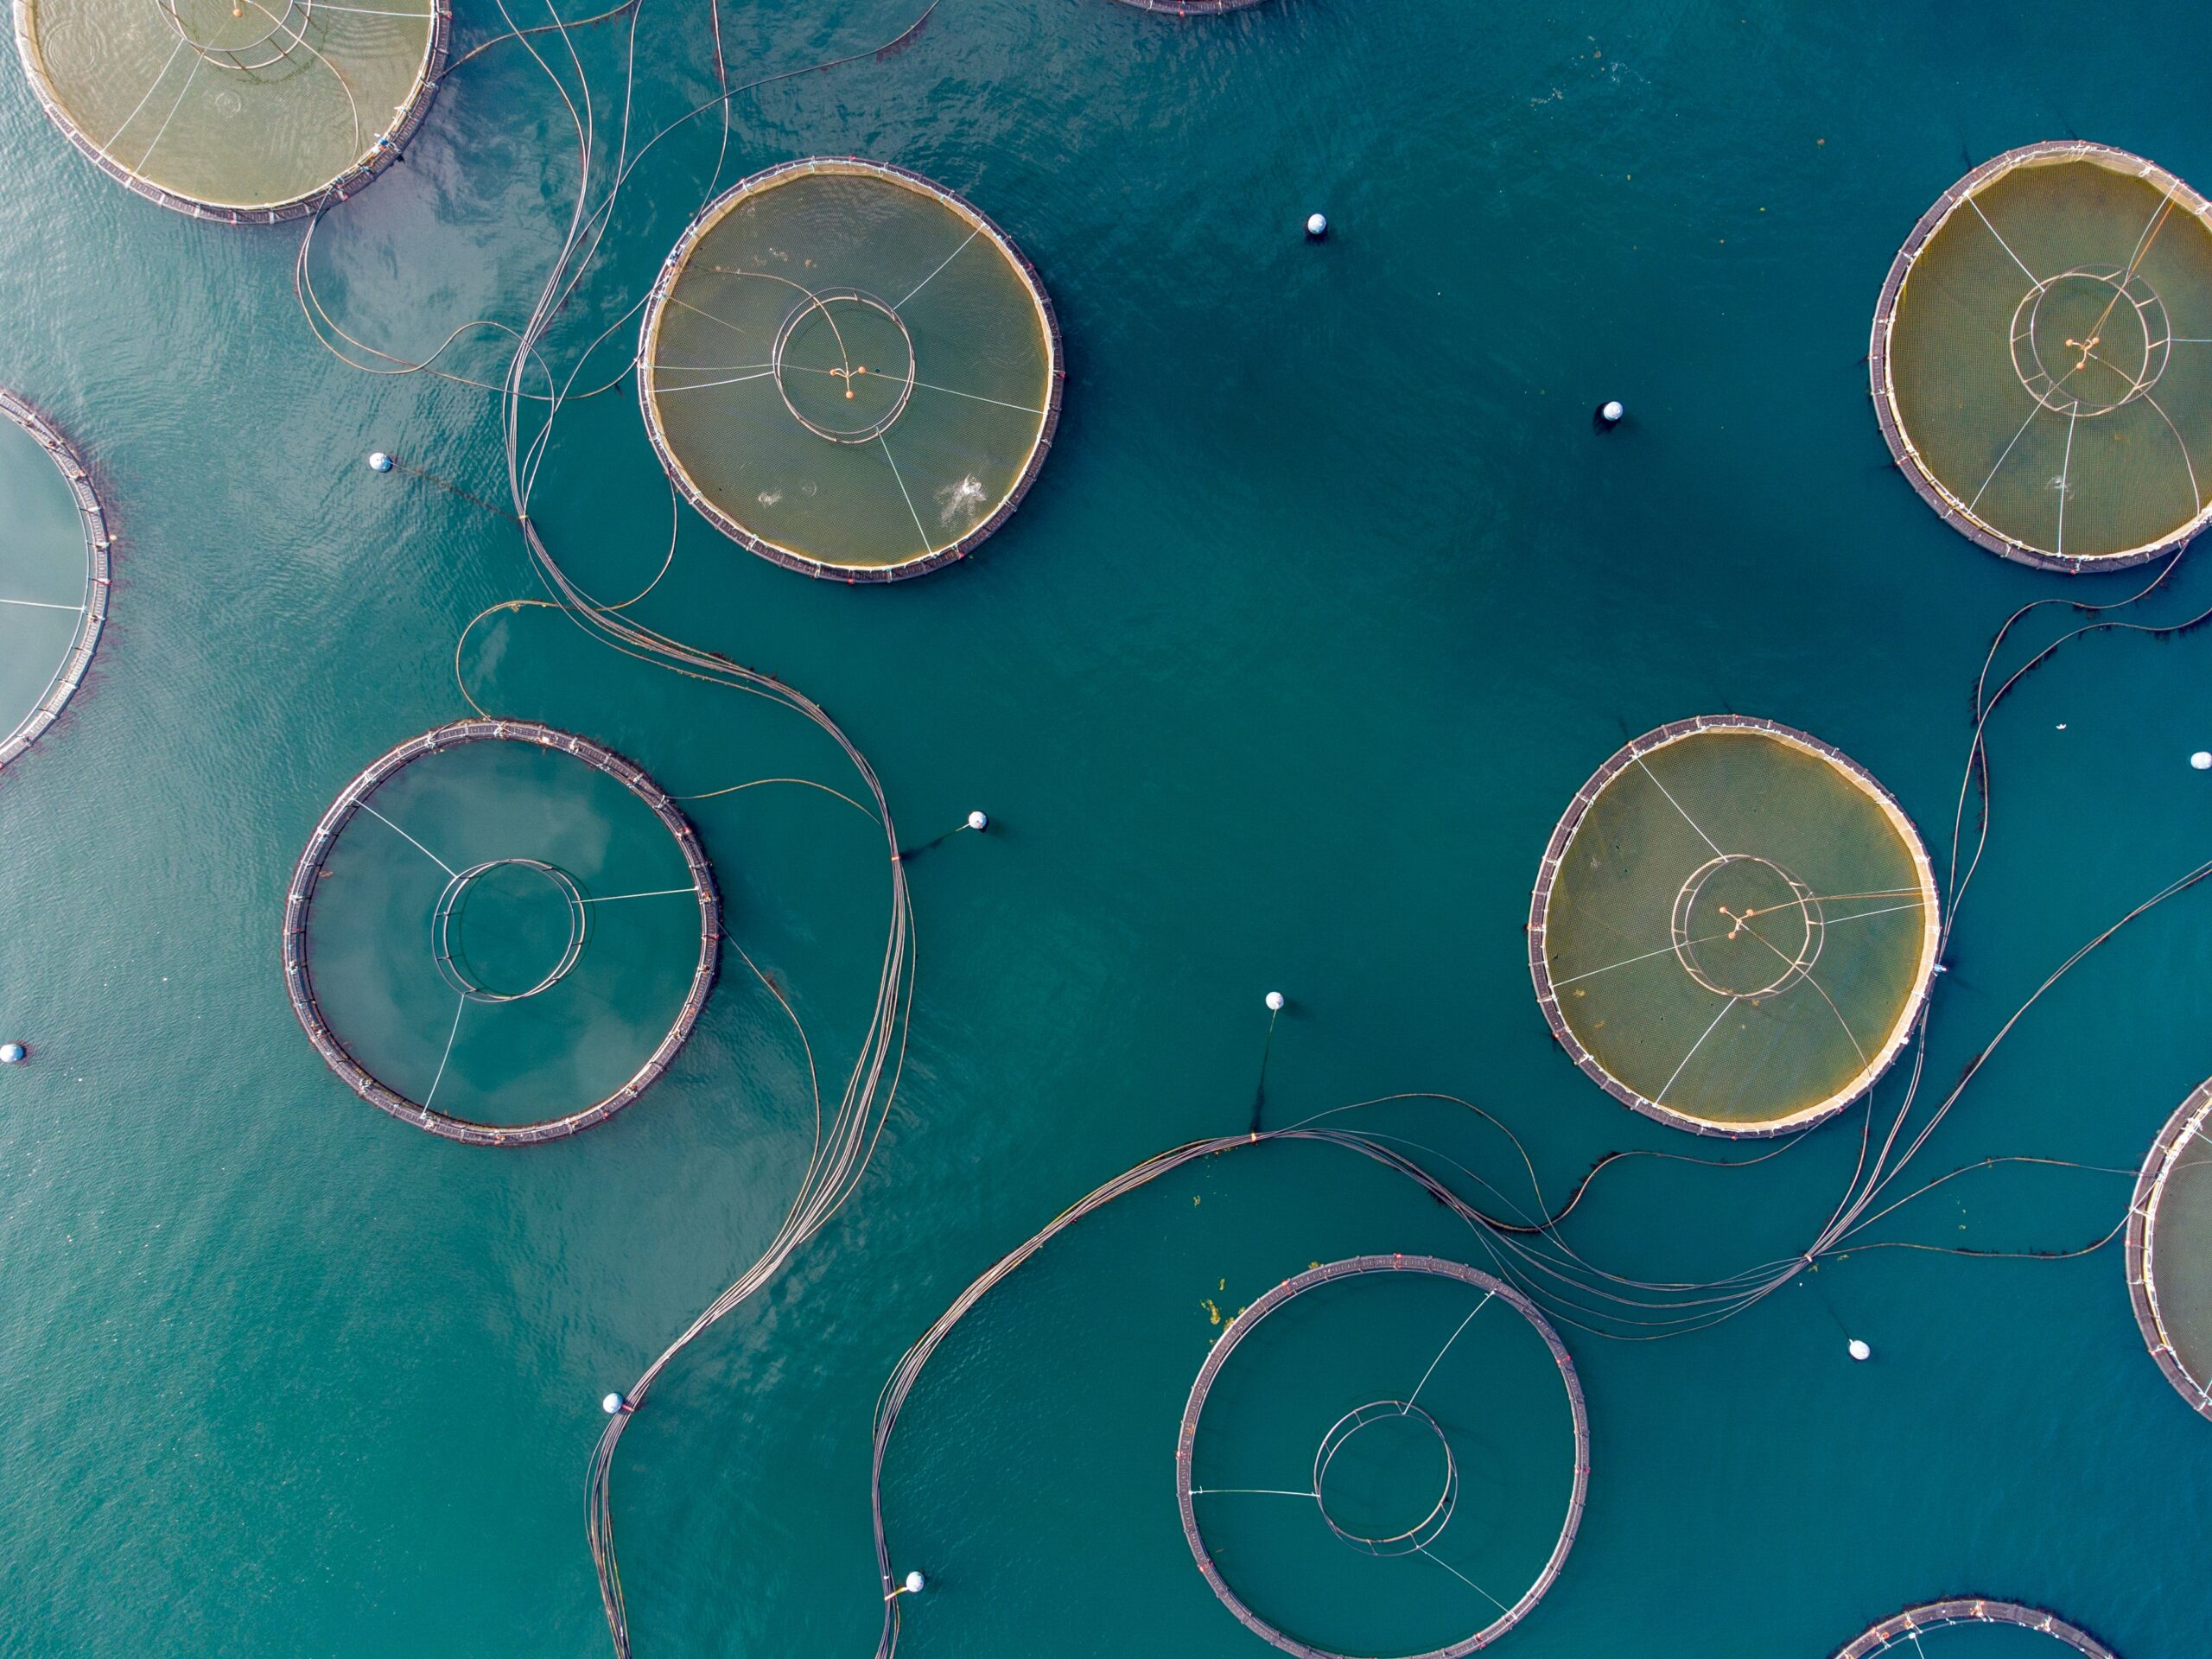 An aerial view of an open water fish farm. Each section of the farm is a circular pen (cage) surrounded by water. Image by Bob Brewer via Unsplash.